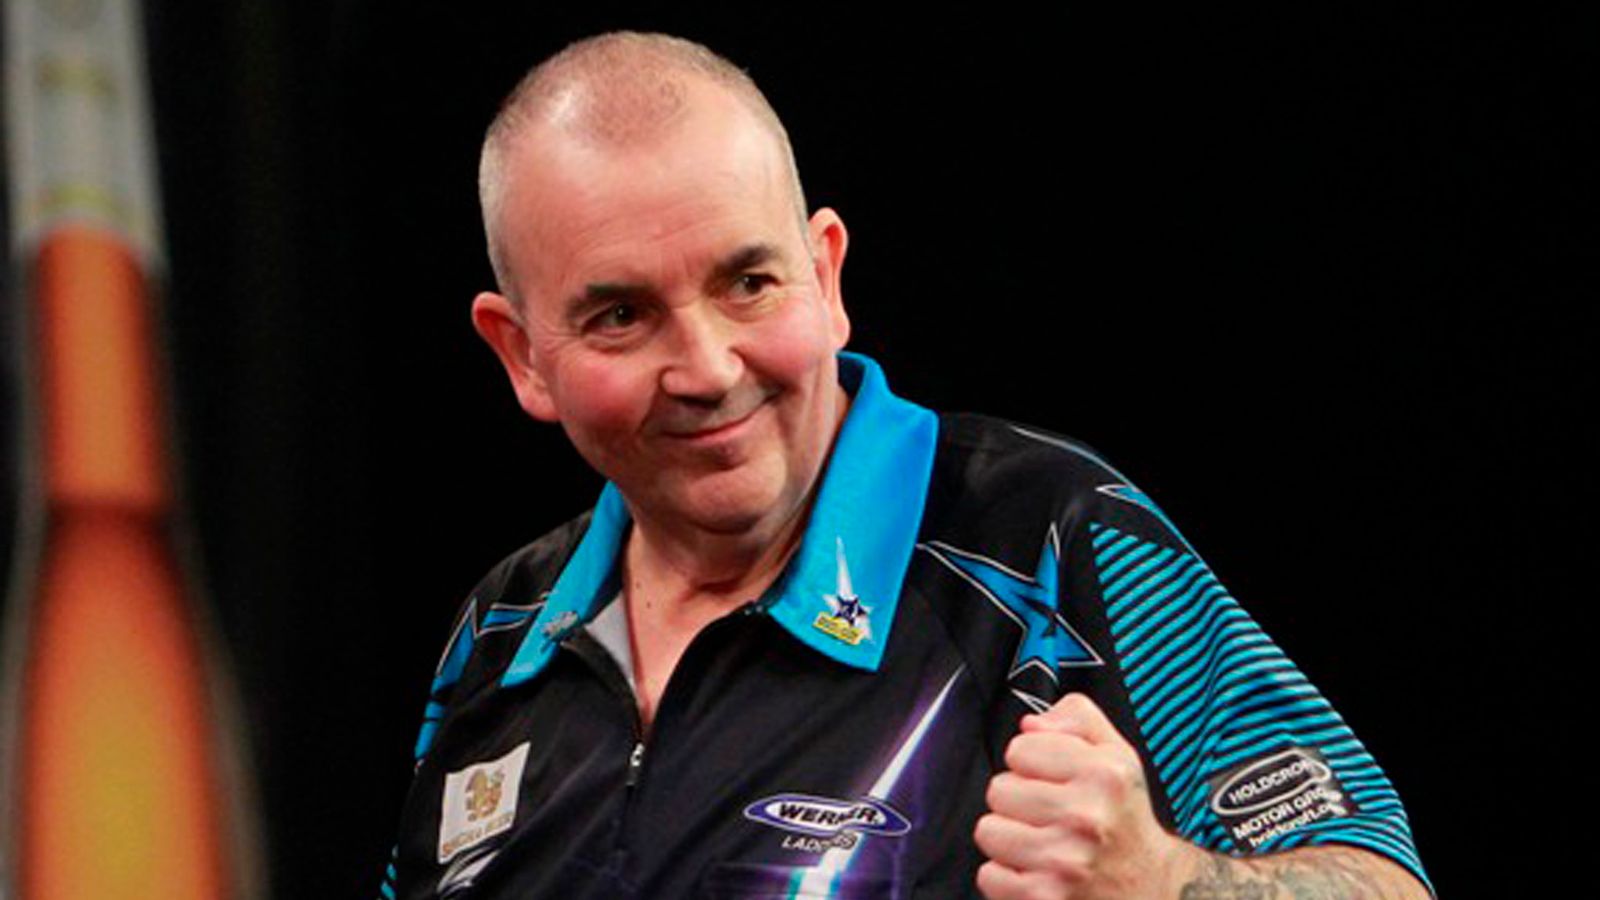 World Darts Championship Phil Taylor begins his bid for a 17th title